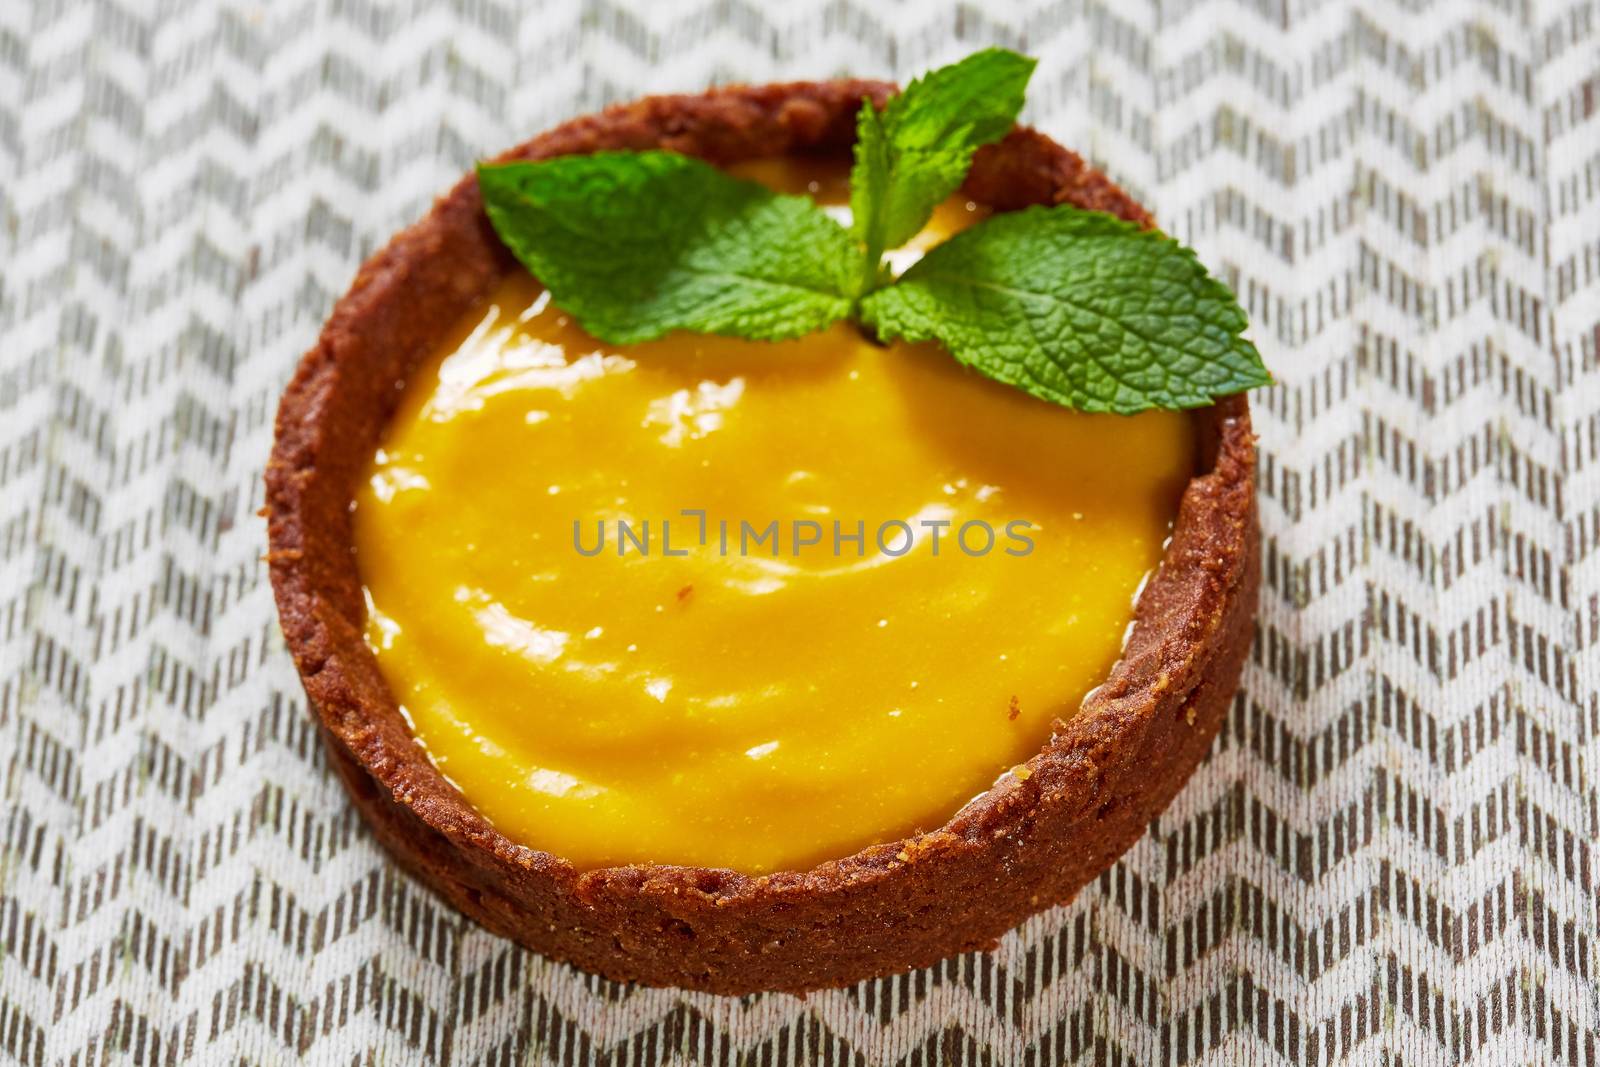 Sweet tartlets filled with cream. With copy space